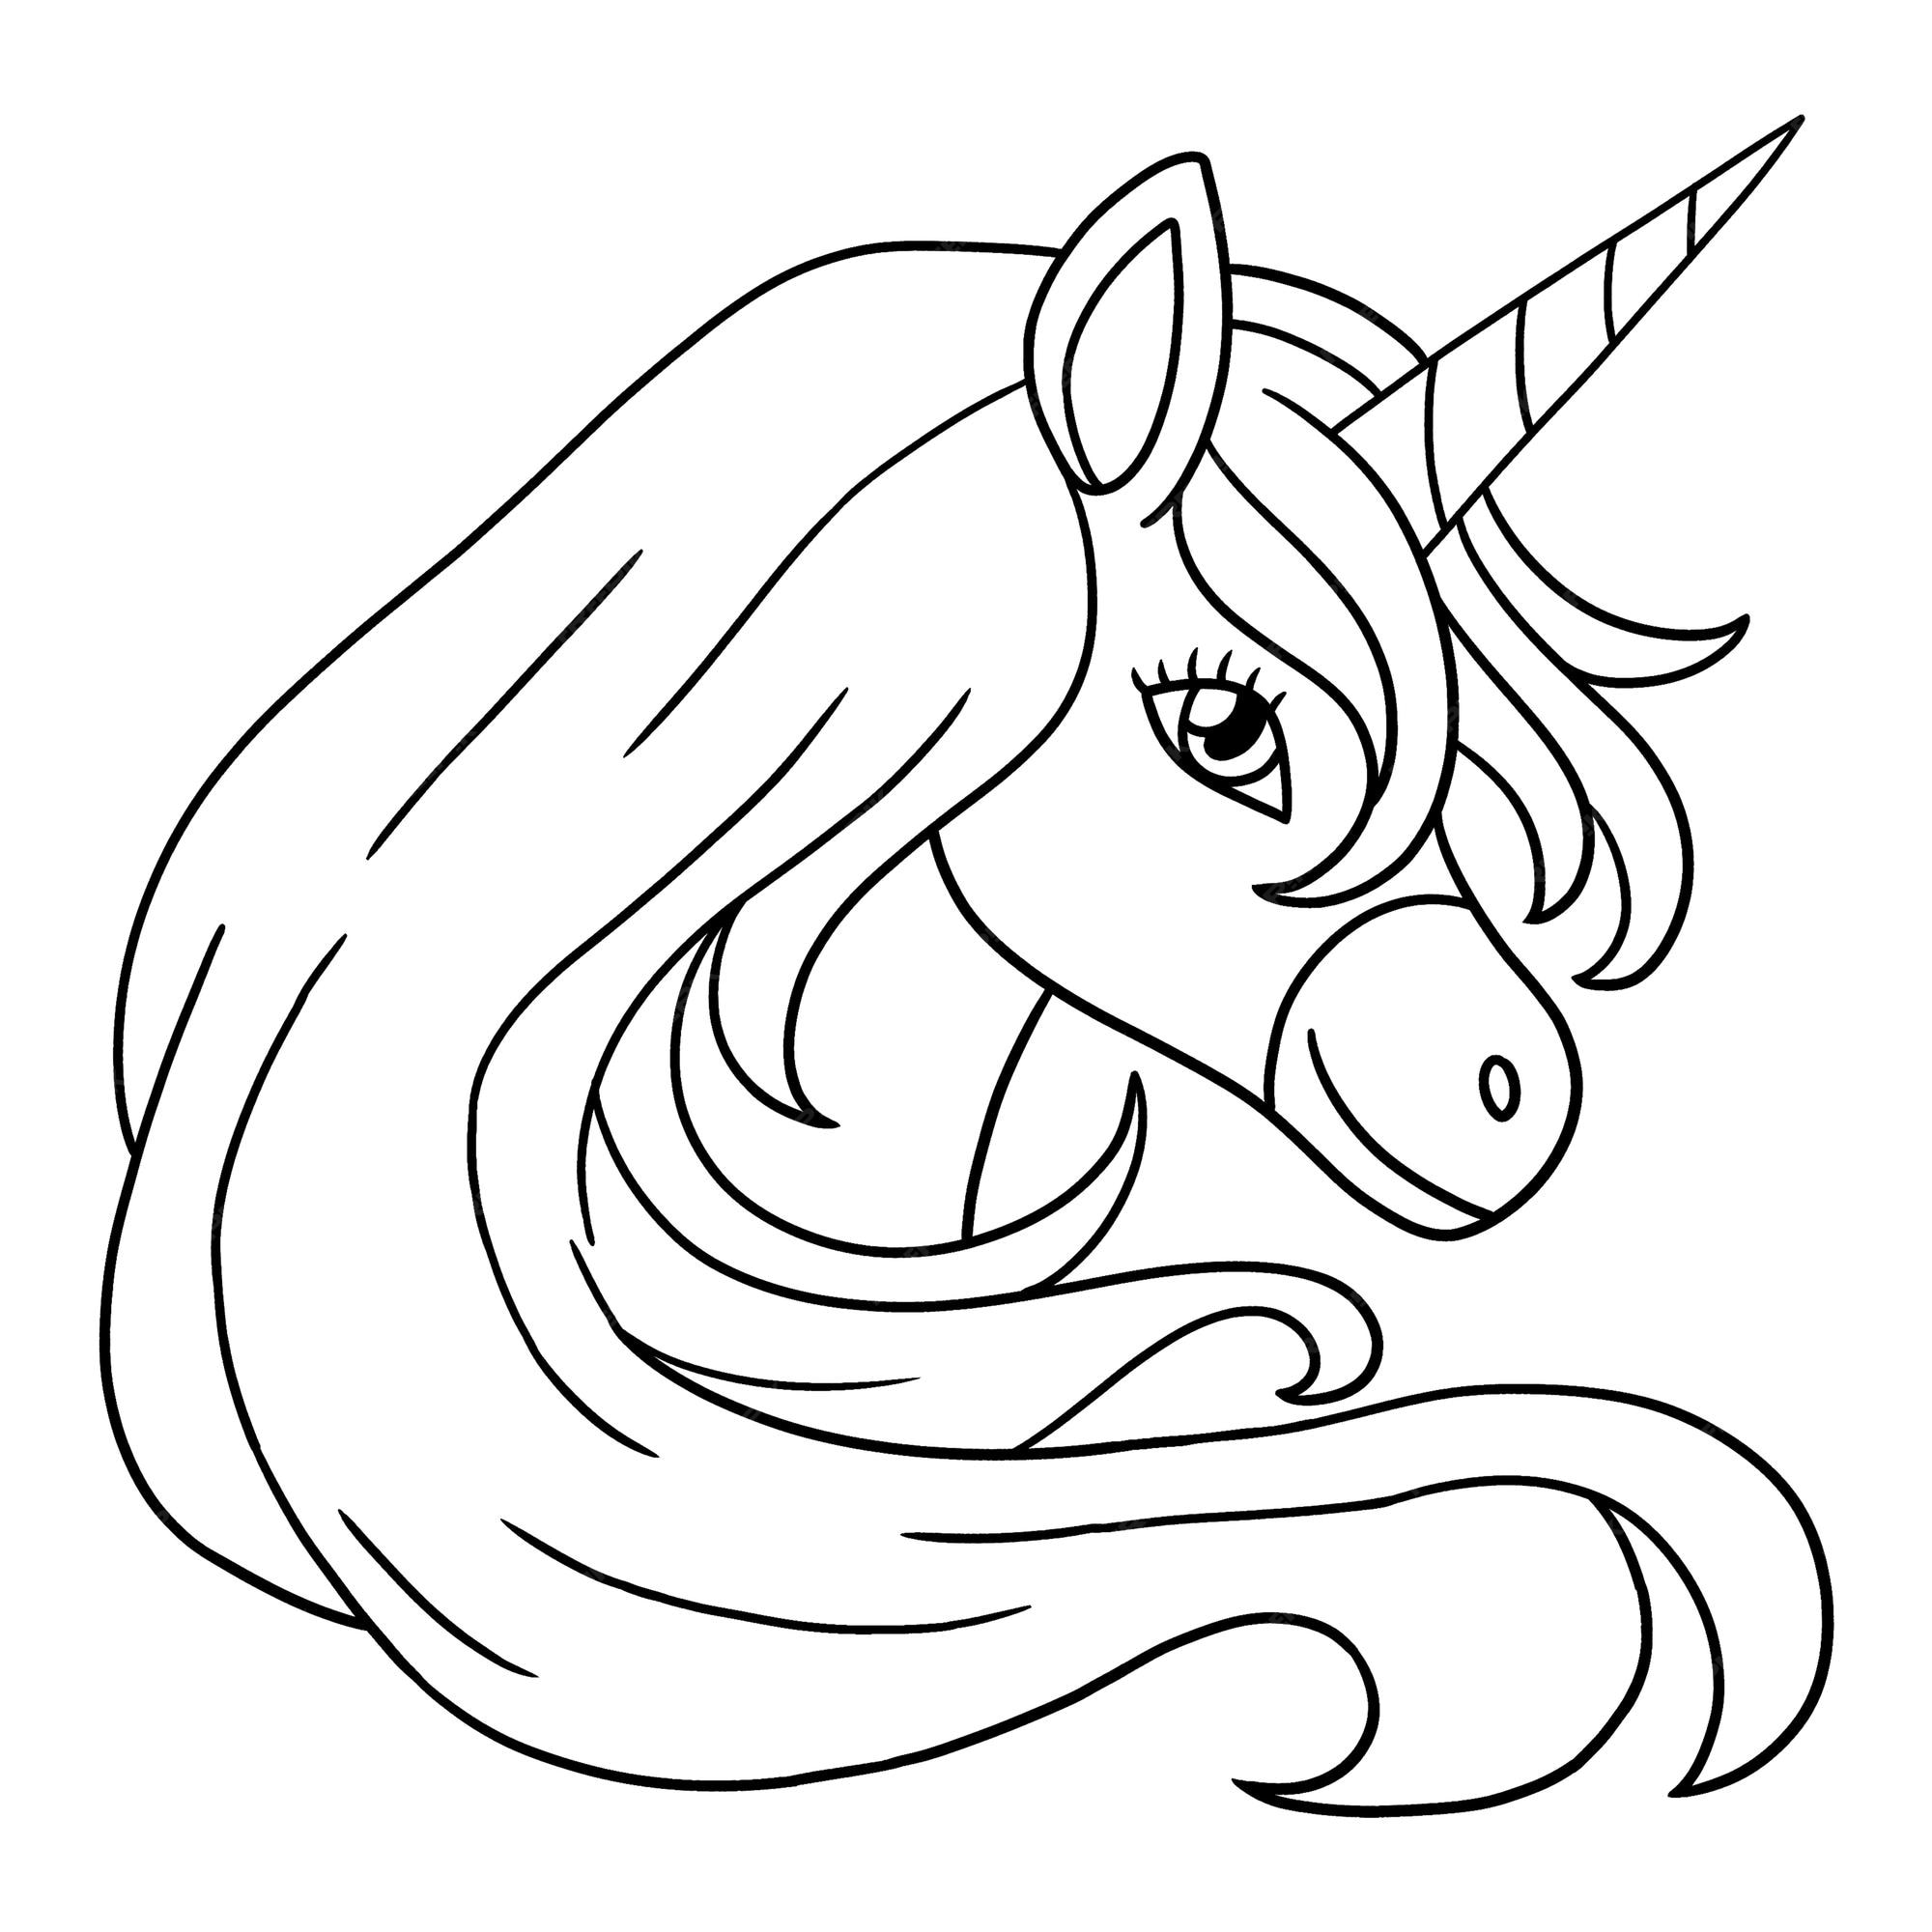 Premium vector unicorn head isolated coloring page for kids